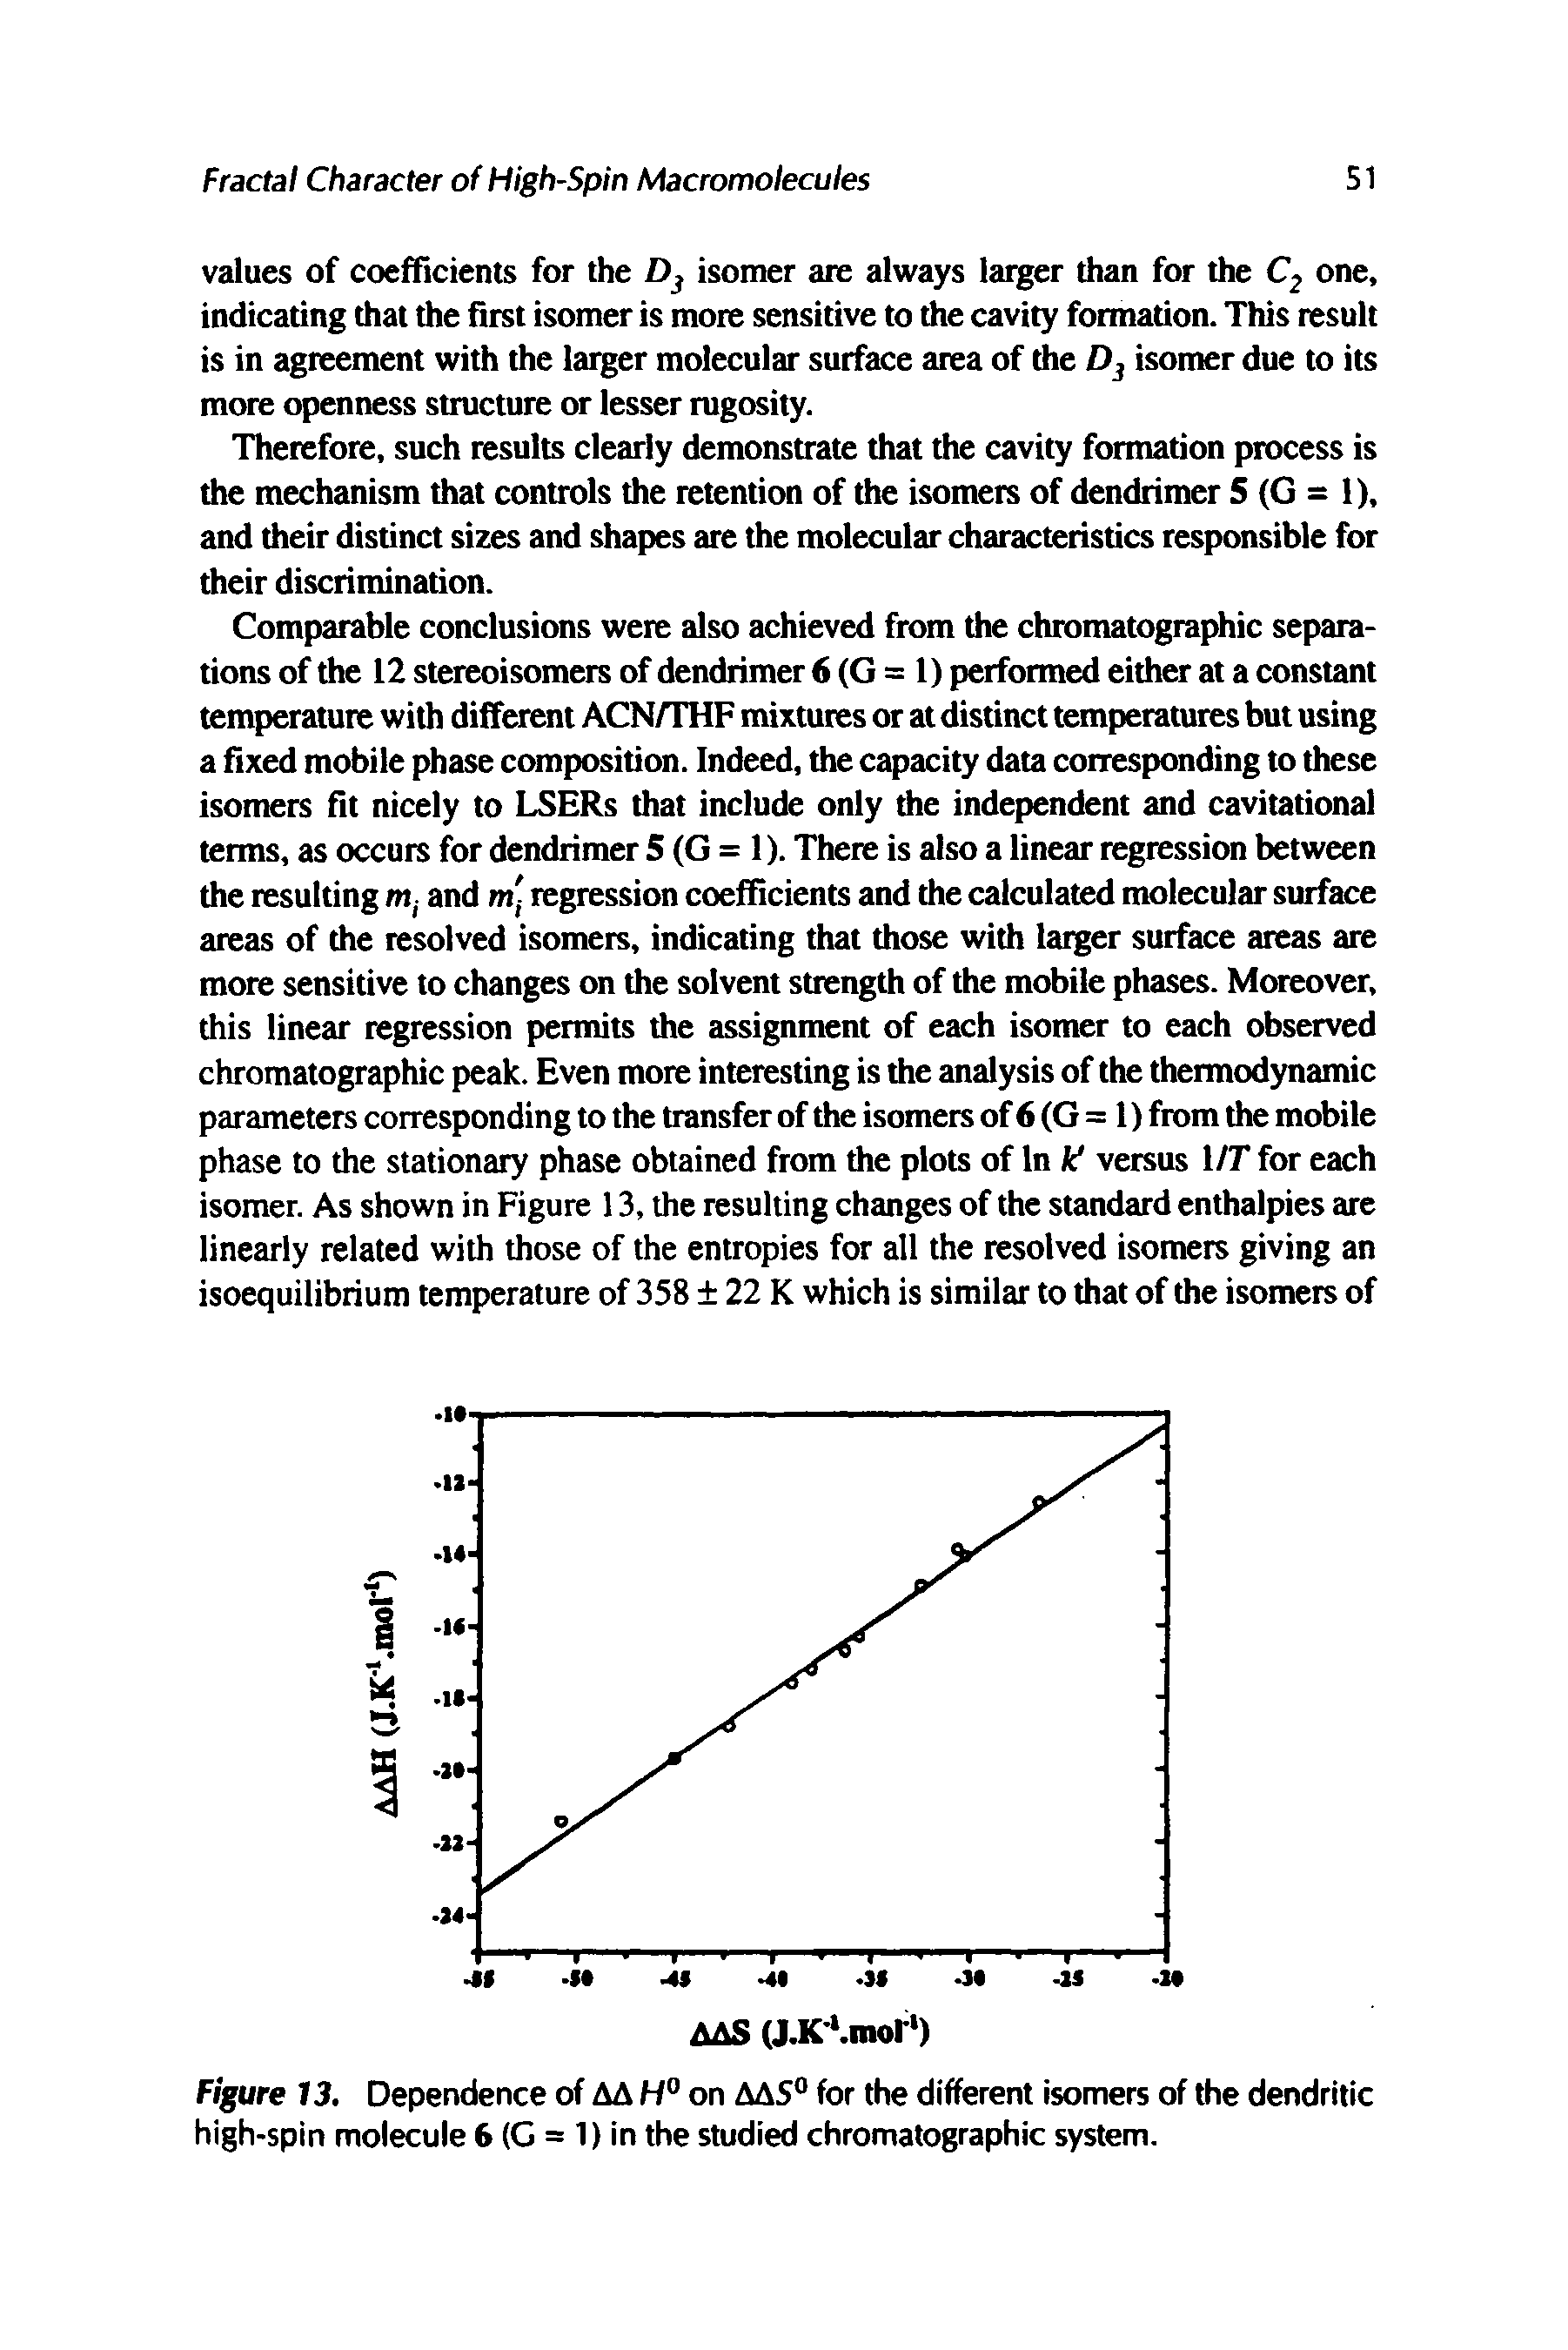 Figure 13. Dependence of AA H° on AAS° for the different isomers of the dendritic high-spin molecule 6 (G = 1) in the studied chromatographic system.